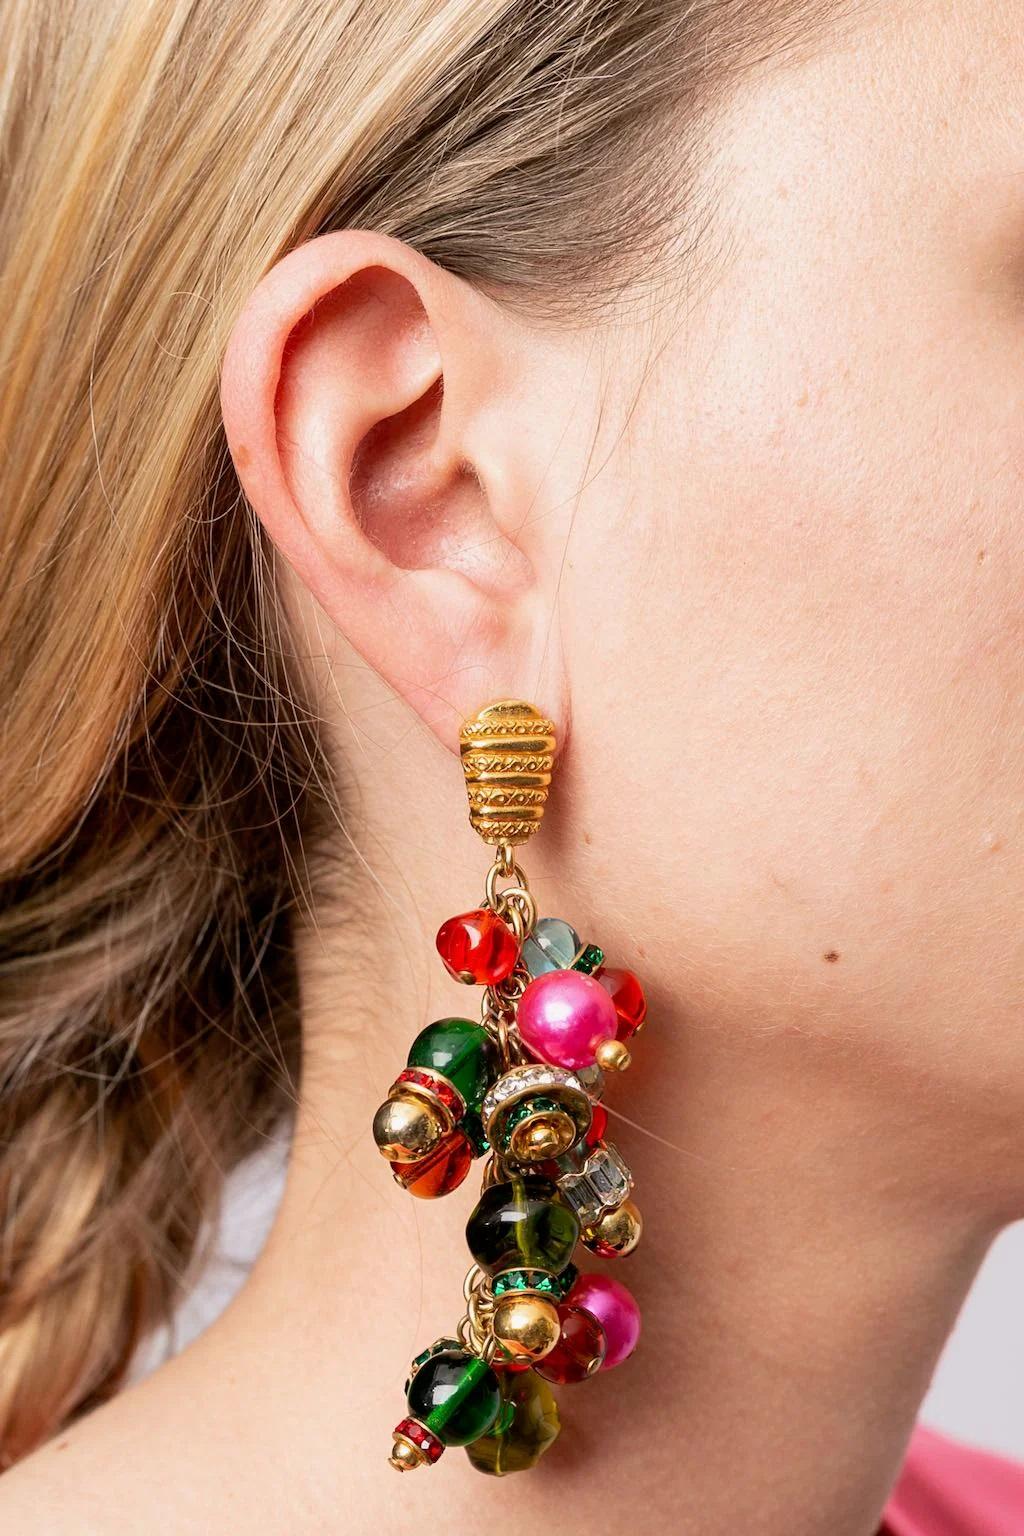 Christian Dior - Gilted metal clip-on earrings hanging several multicoloured glass beads and rhinestones.

Additional information:
Dimensions: 3 W x 11 H cm (1.18